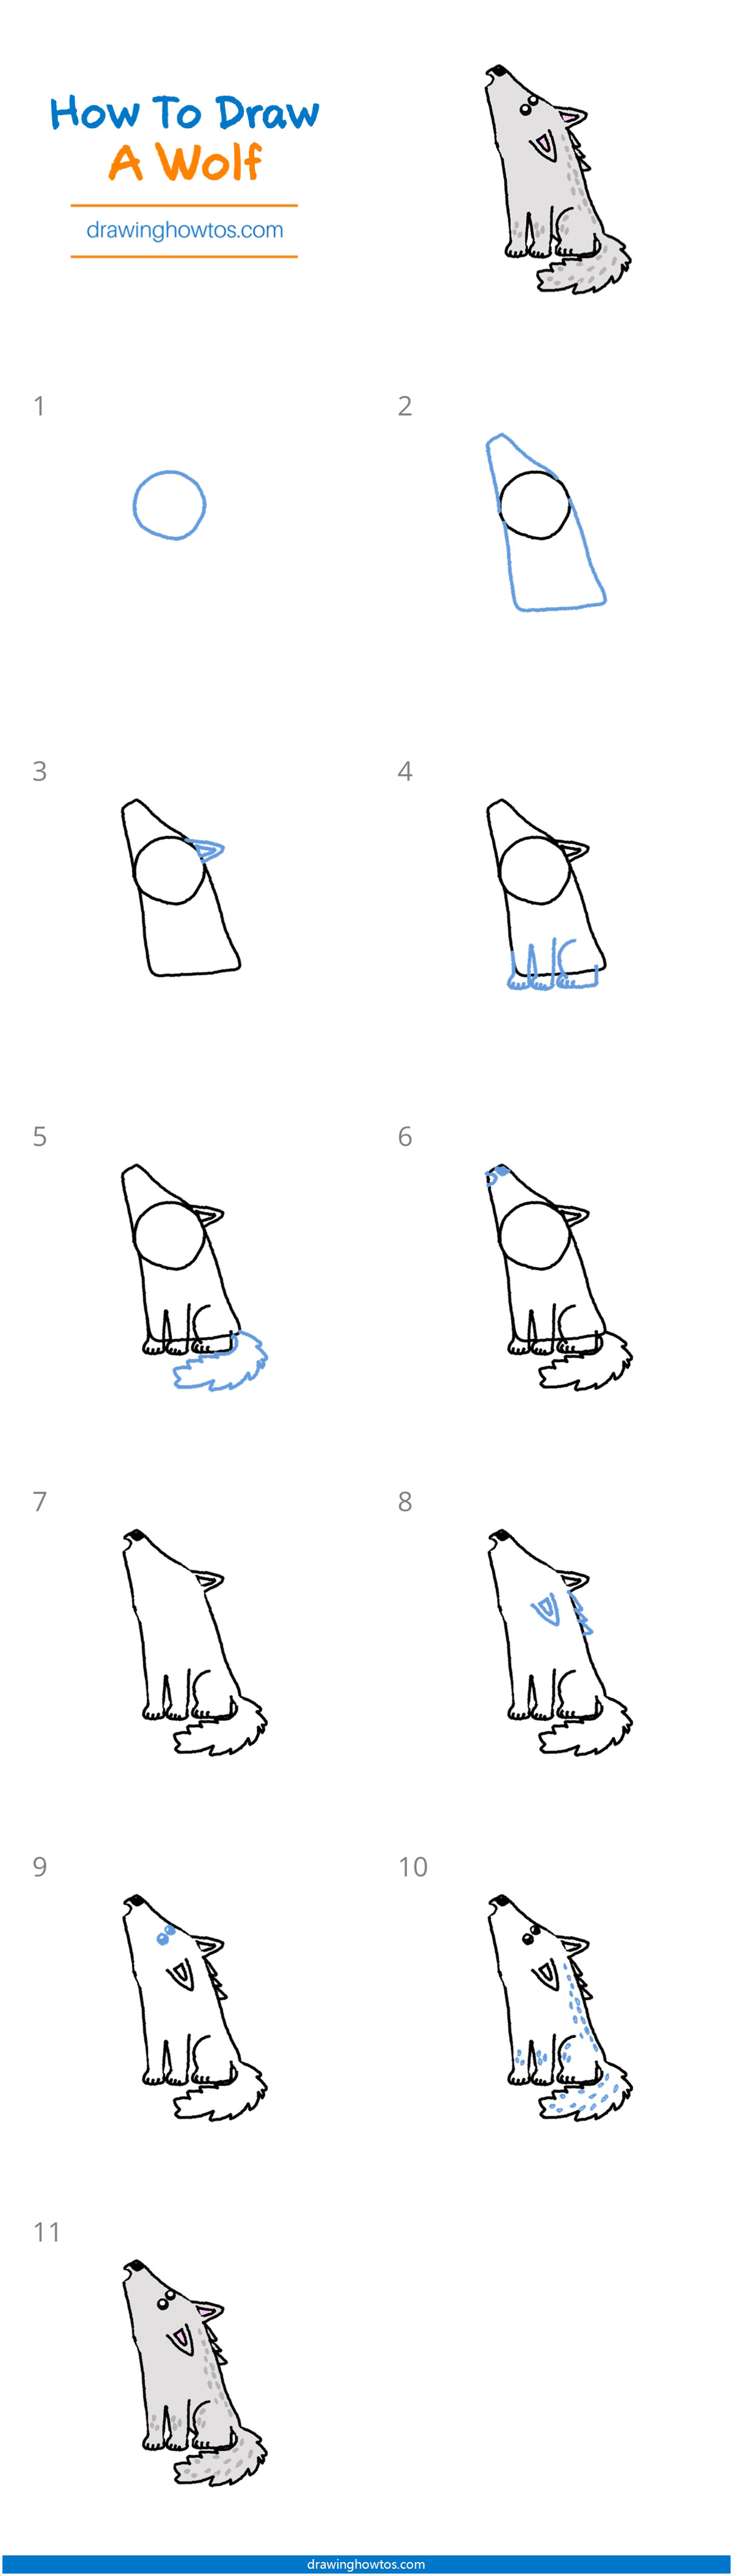 how to draw a wolf step by step easy drawing guides drawing howtos how to draw a wolf step by step easy